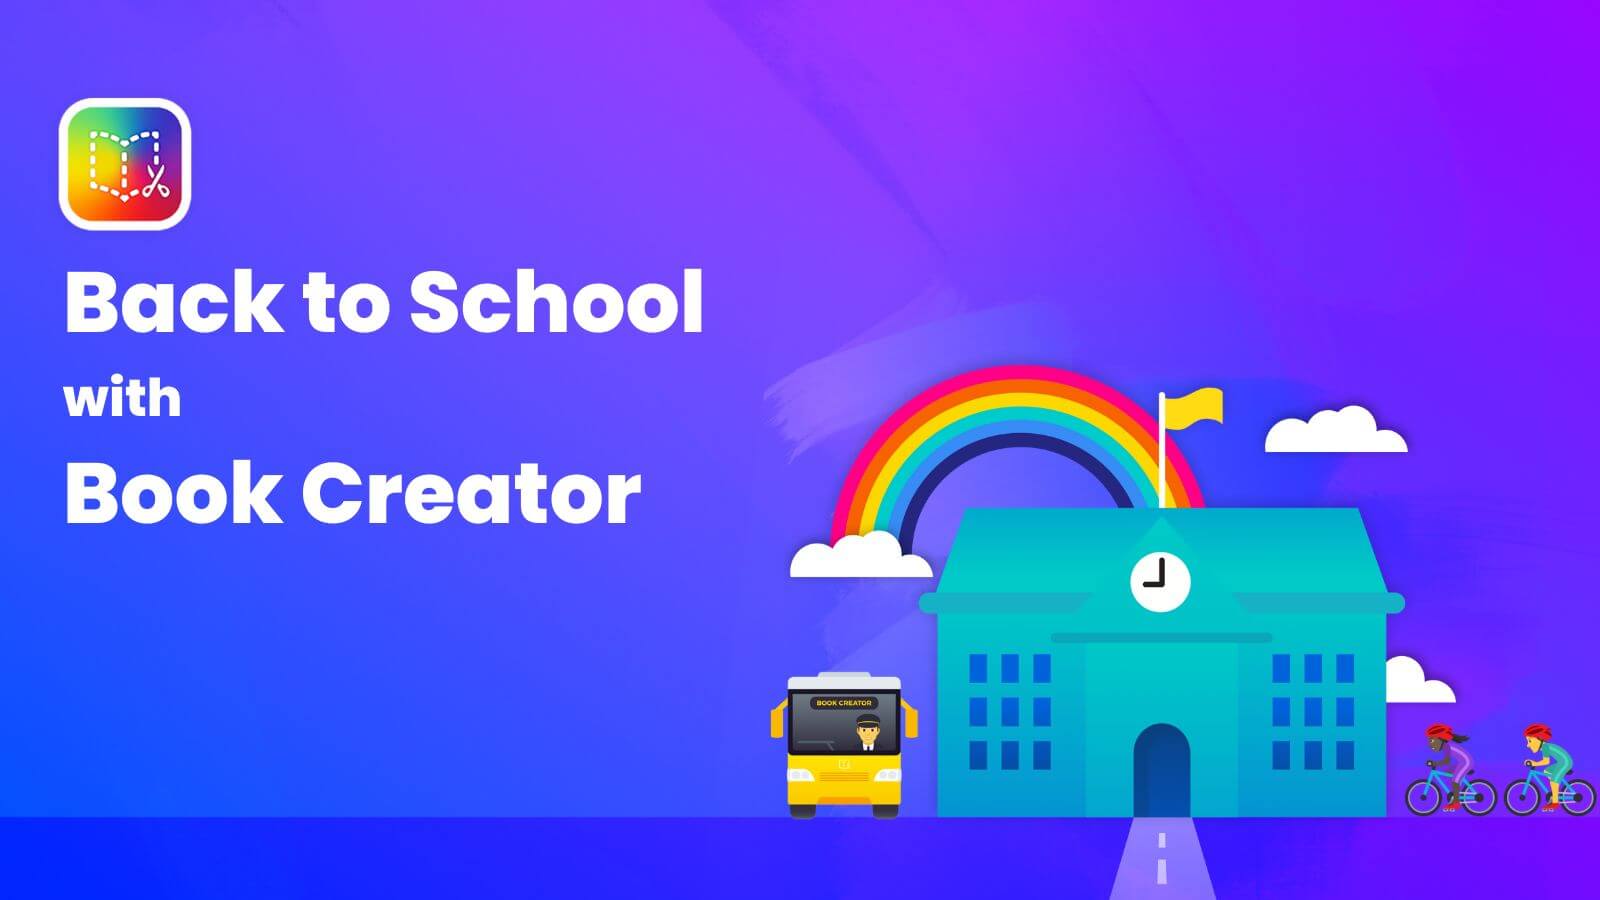 Back to School with Book Creator